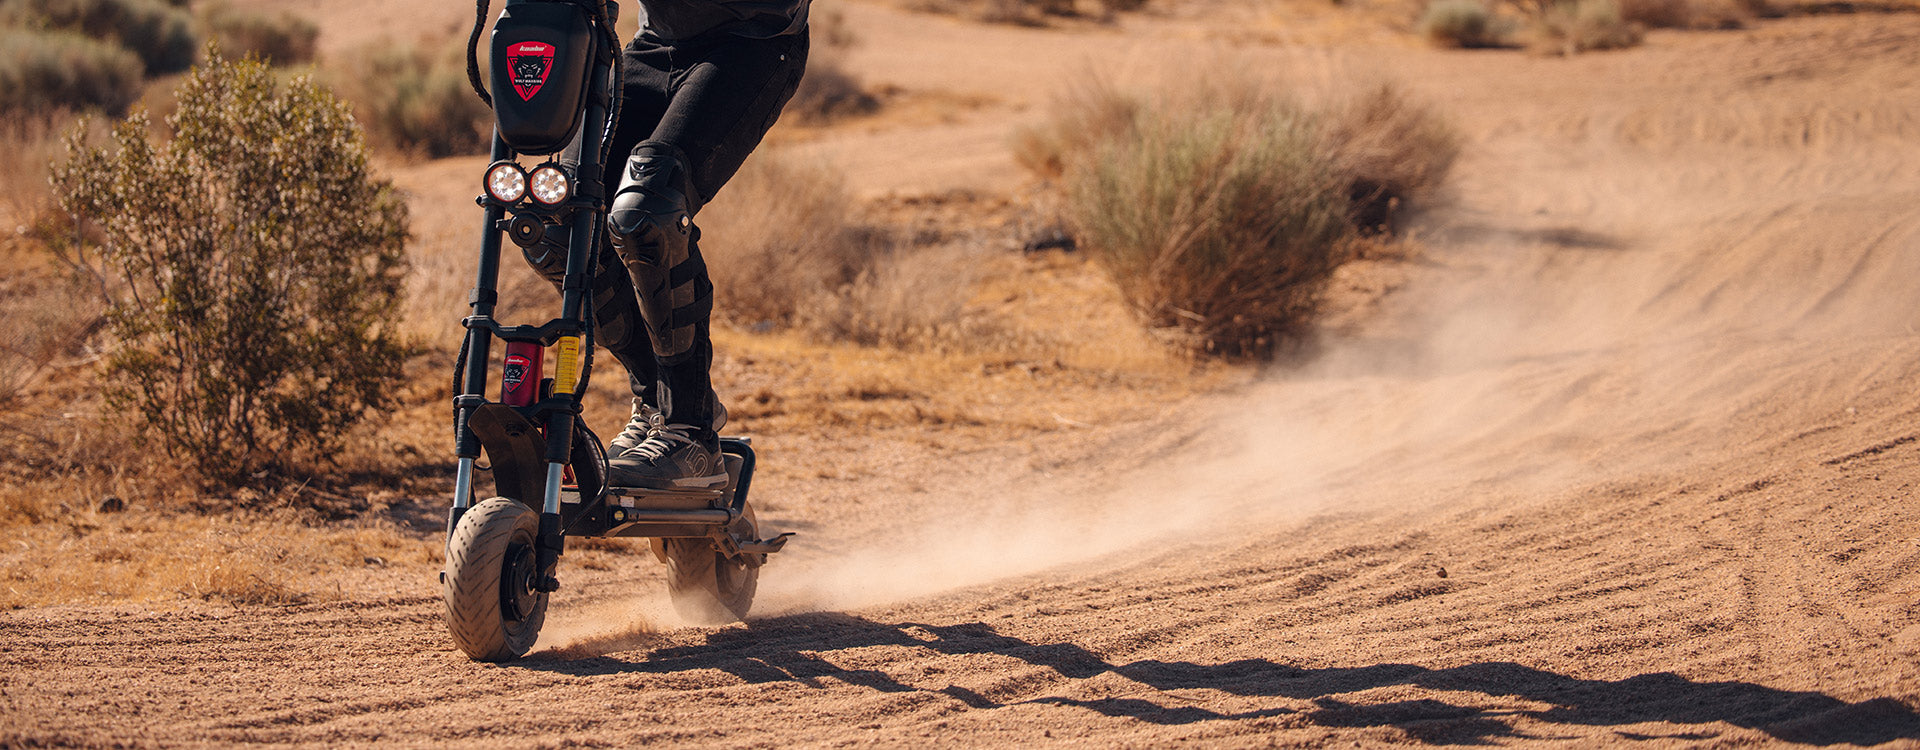 An electric scooter rider navigating a dusty trail on the Kaabo Wolf Warrior 11 Pro+ with a desert landscape in the background, highlighting the scooter's off-road capabilities.